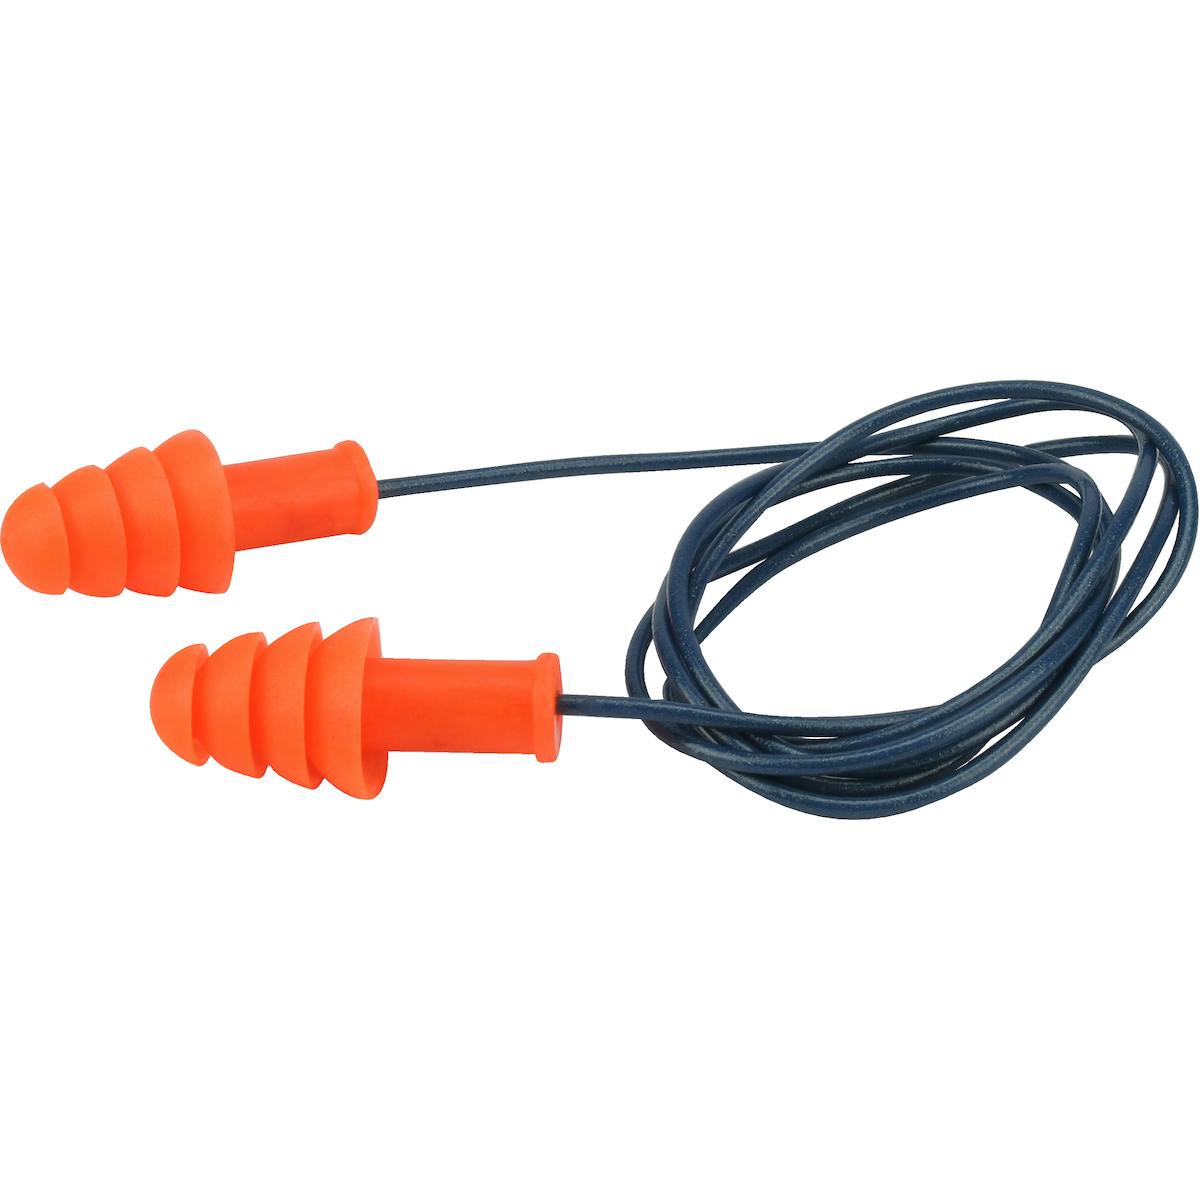 Metal Detectable Reusable TPR Corded Ear Plugs - NRR 27, Orange (267-HPR400D) - OS